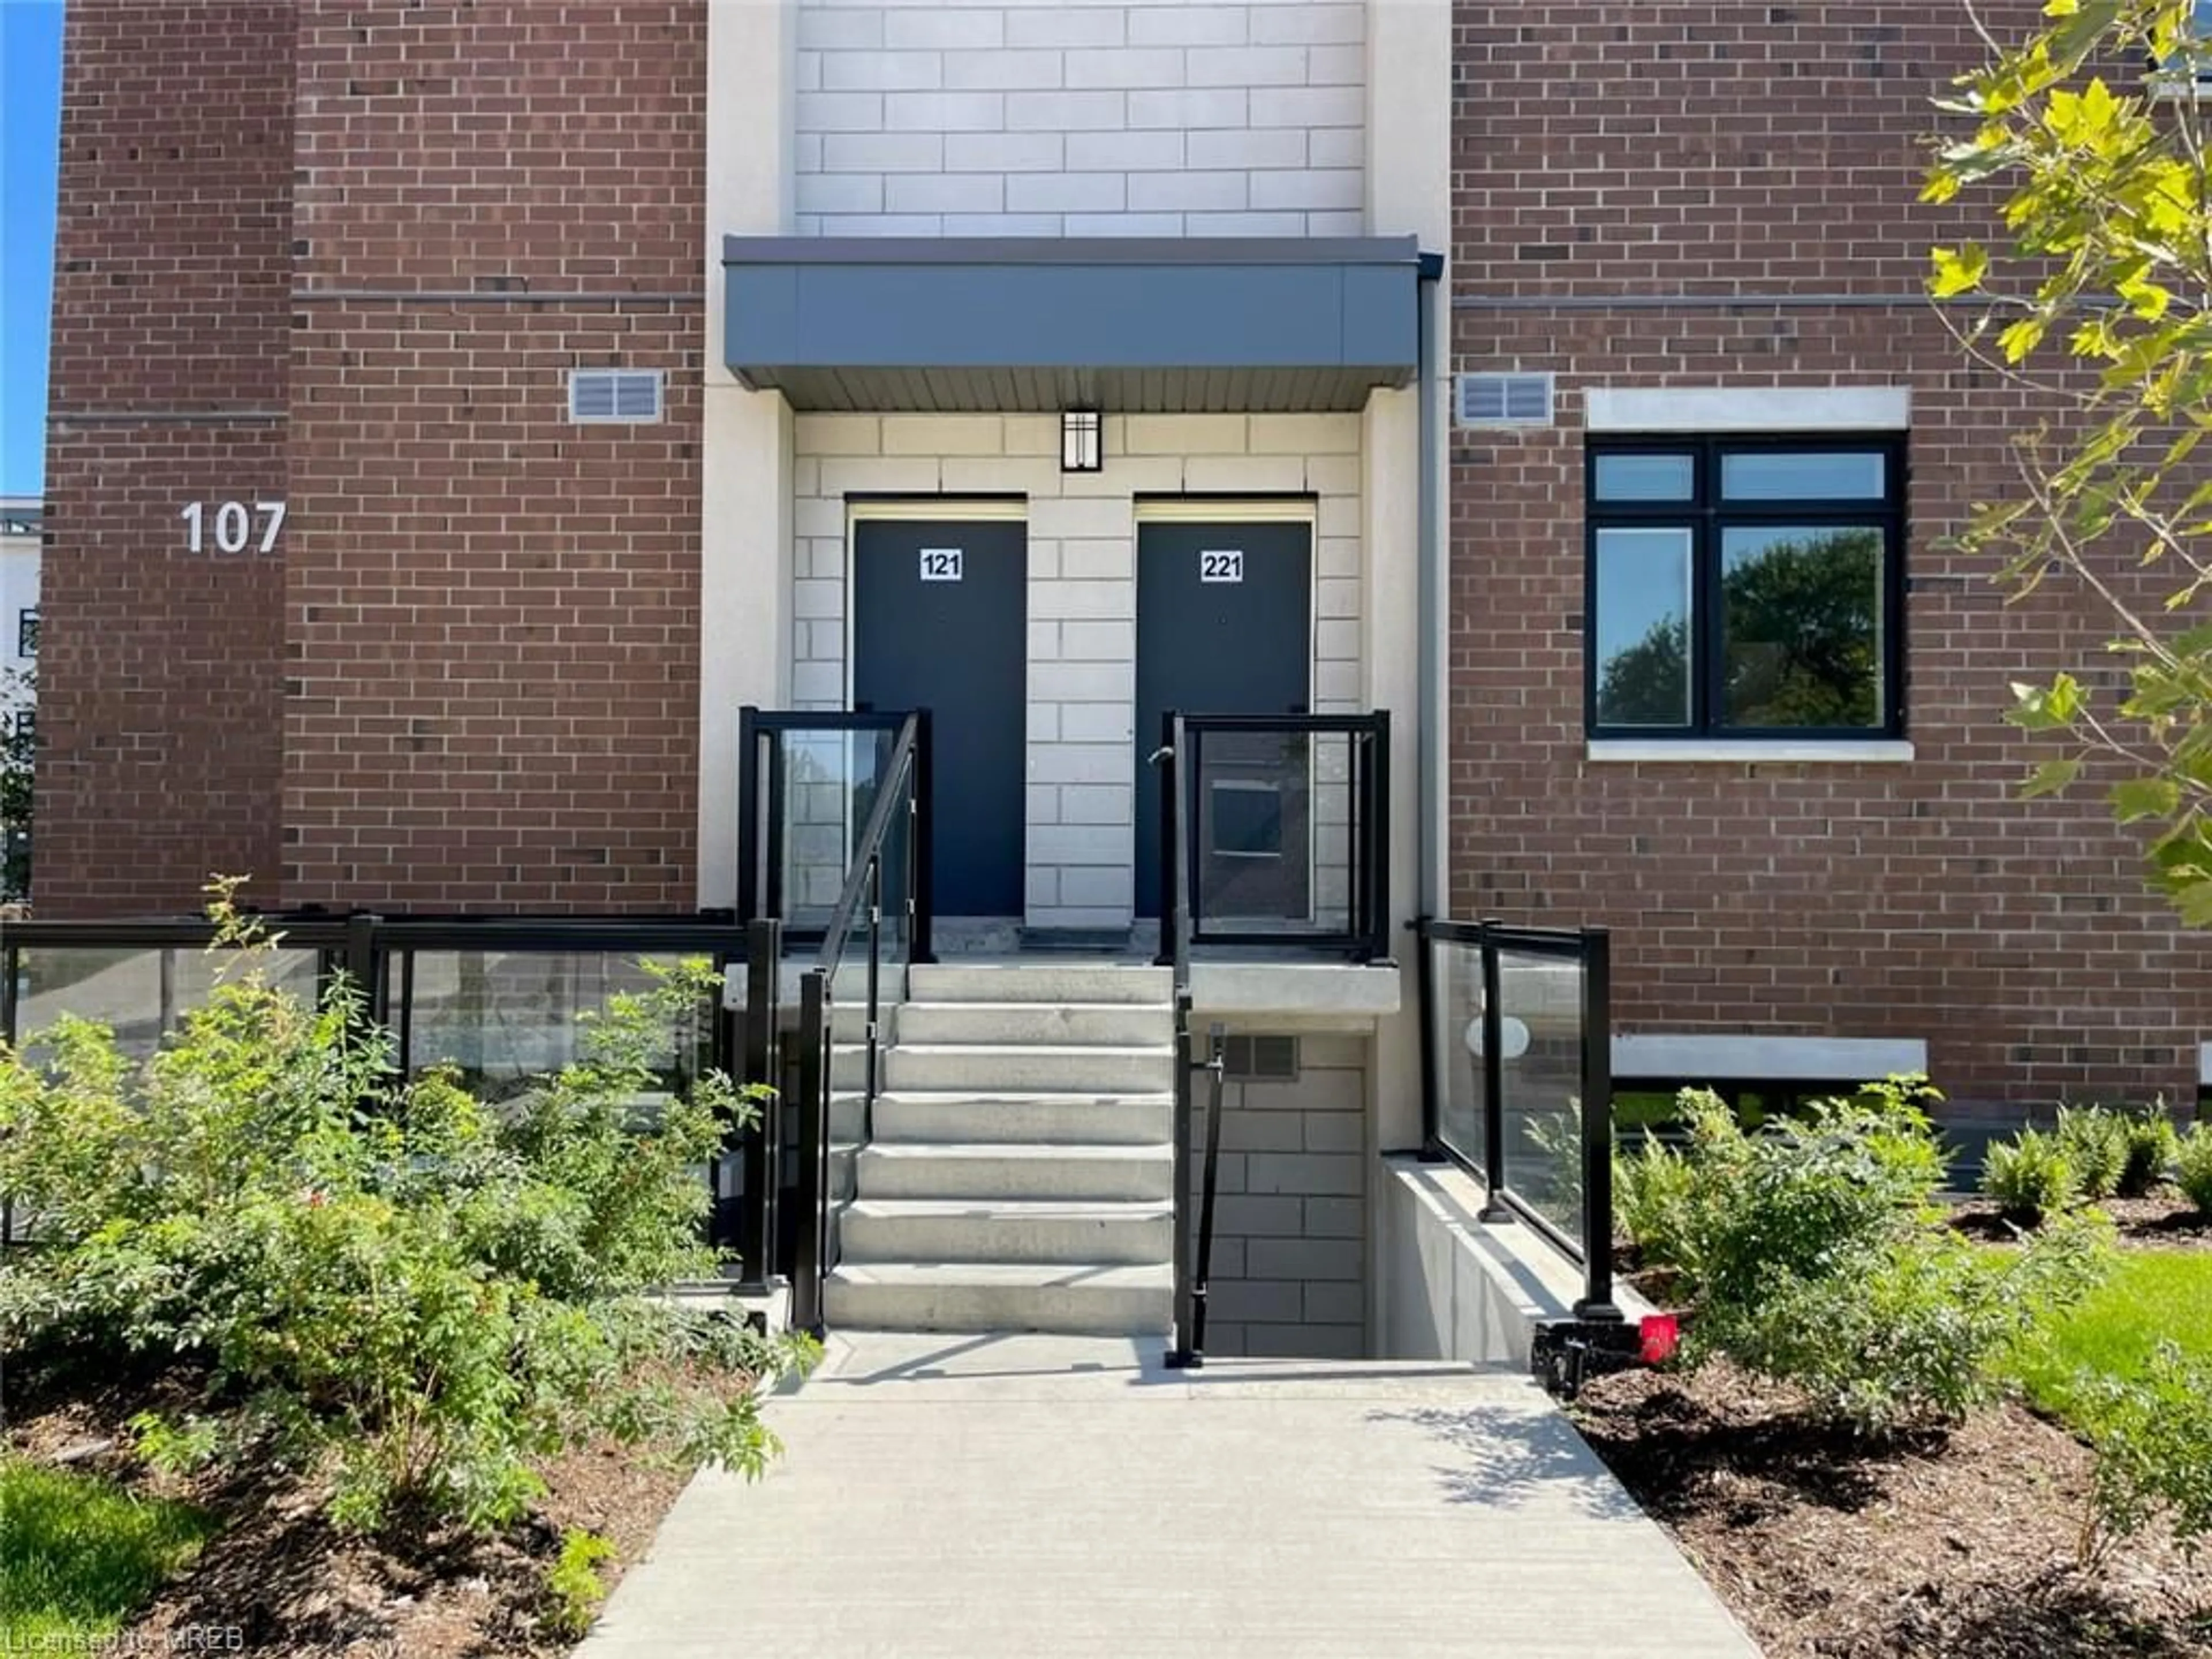 Indoor entryway for 1070 Douglas Mccurdy Common #221, Mississauga Ontario L5G 0C6